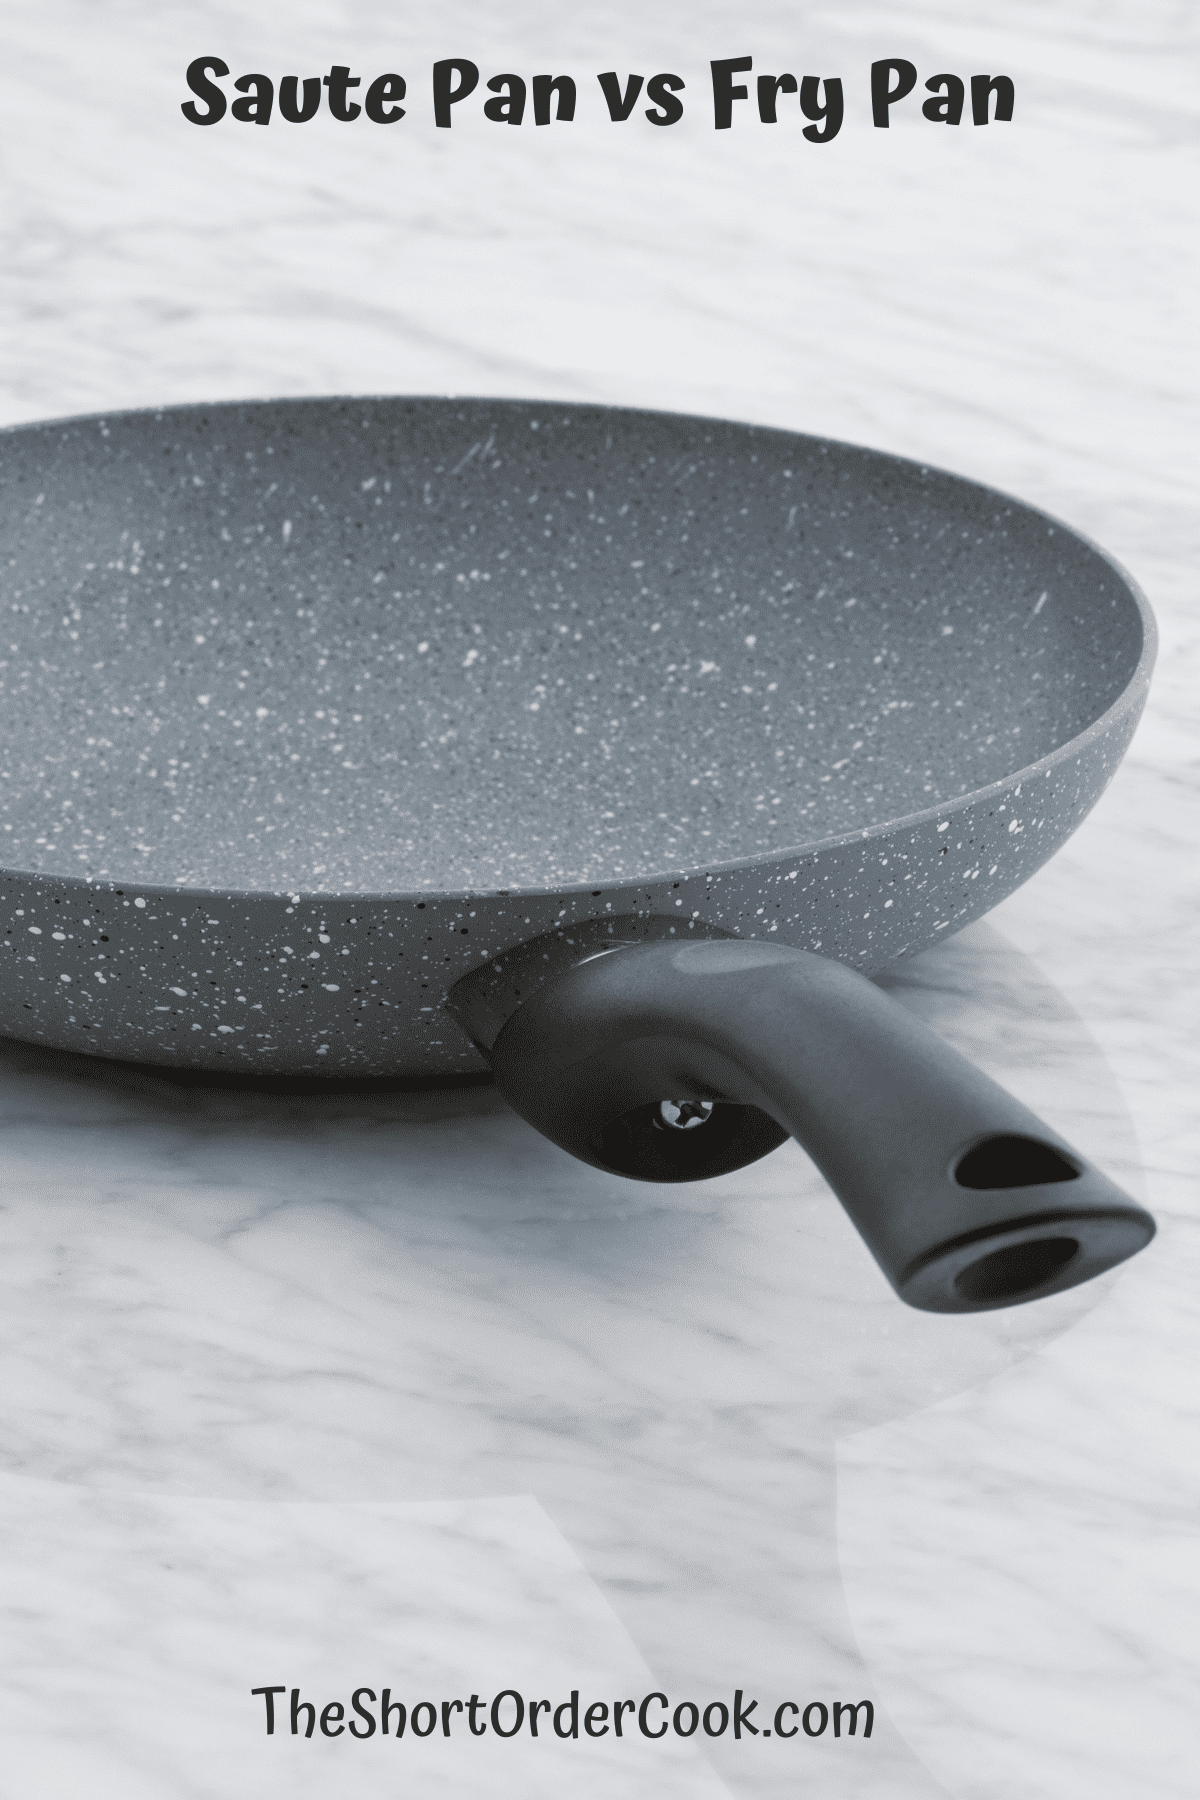 A granite frying pan which is different than a saute pan.